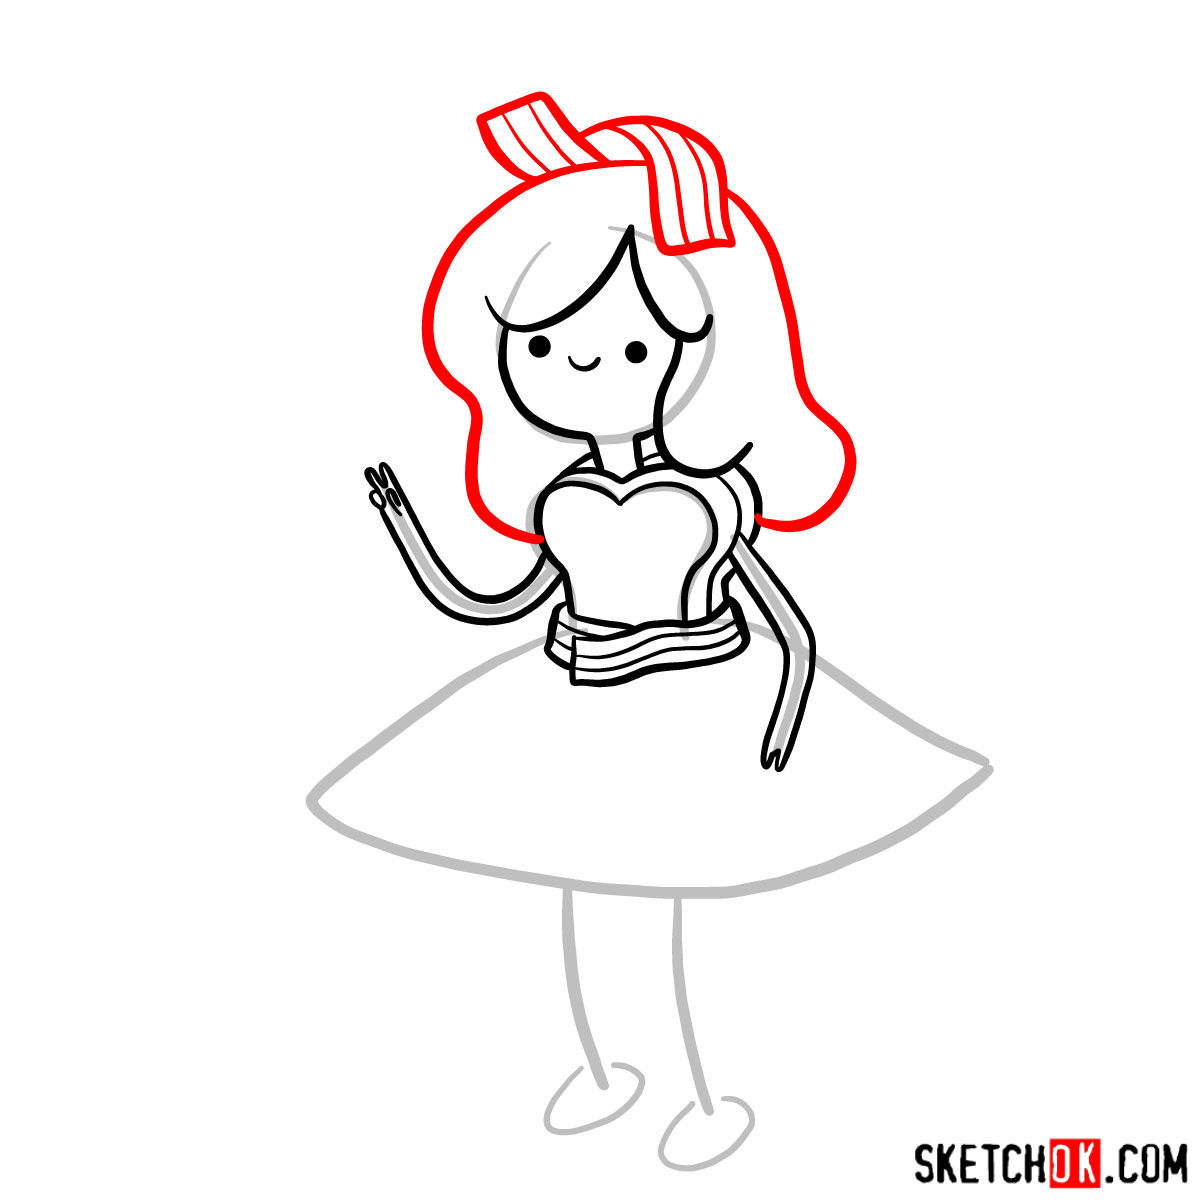 How to draw Breakfast Princess from Adventure Time - step 08